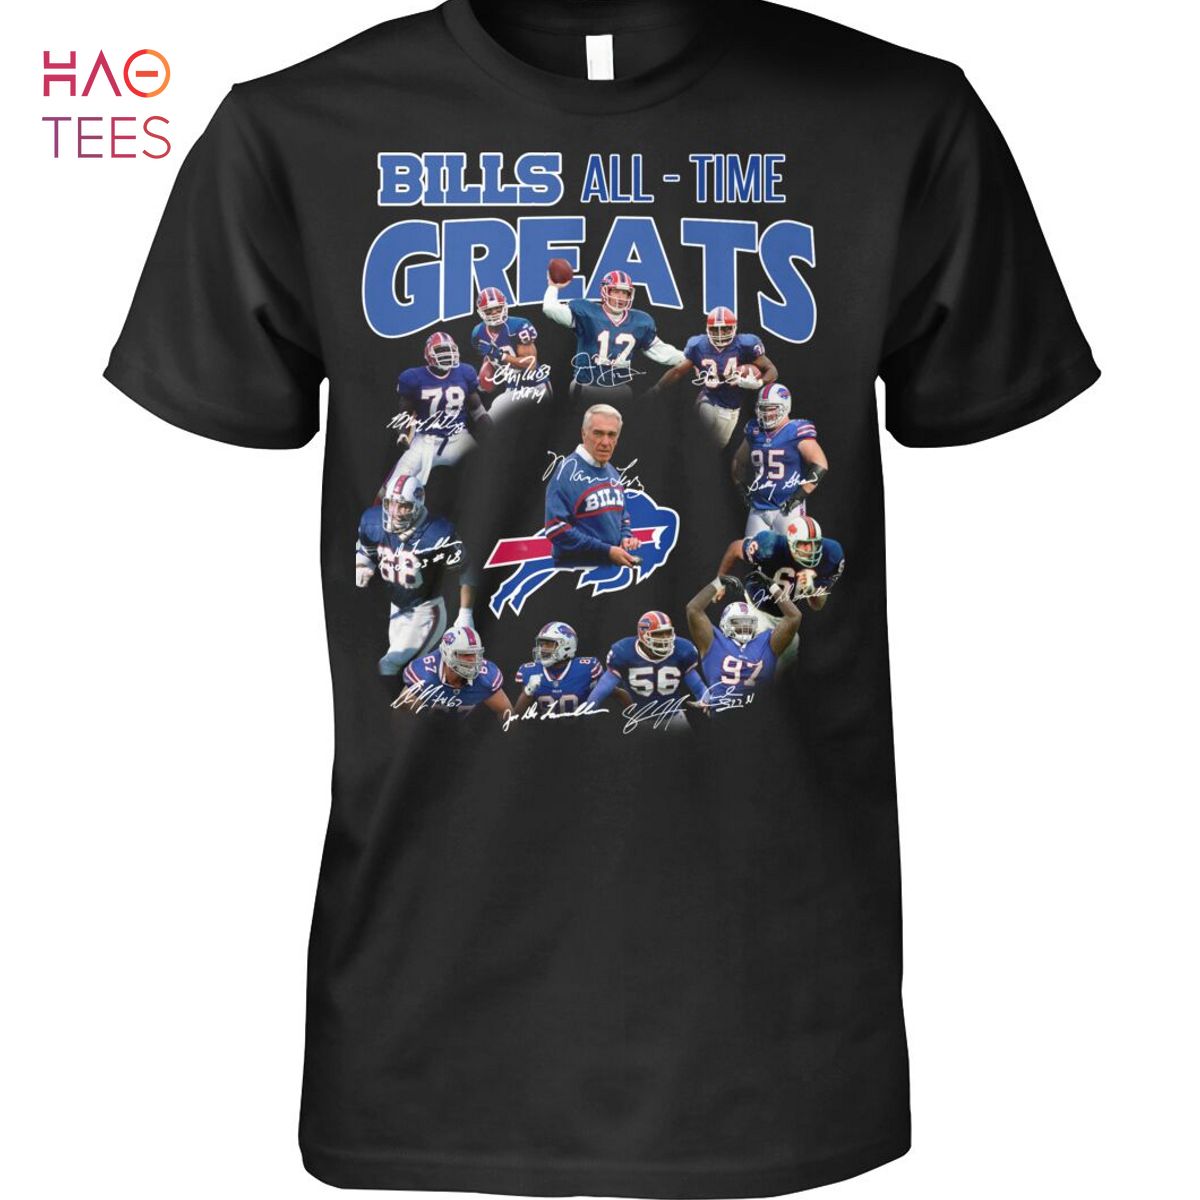 Bilis All Time Greats Shirt Limited Edition